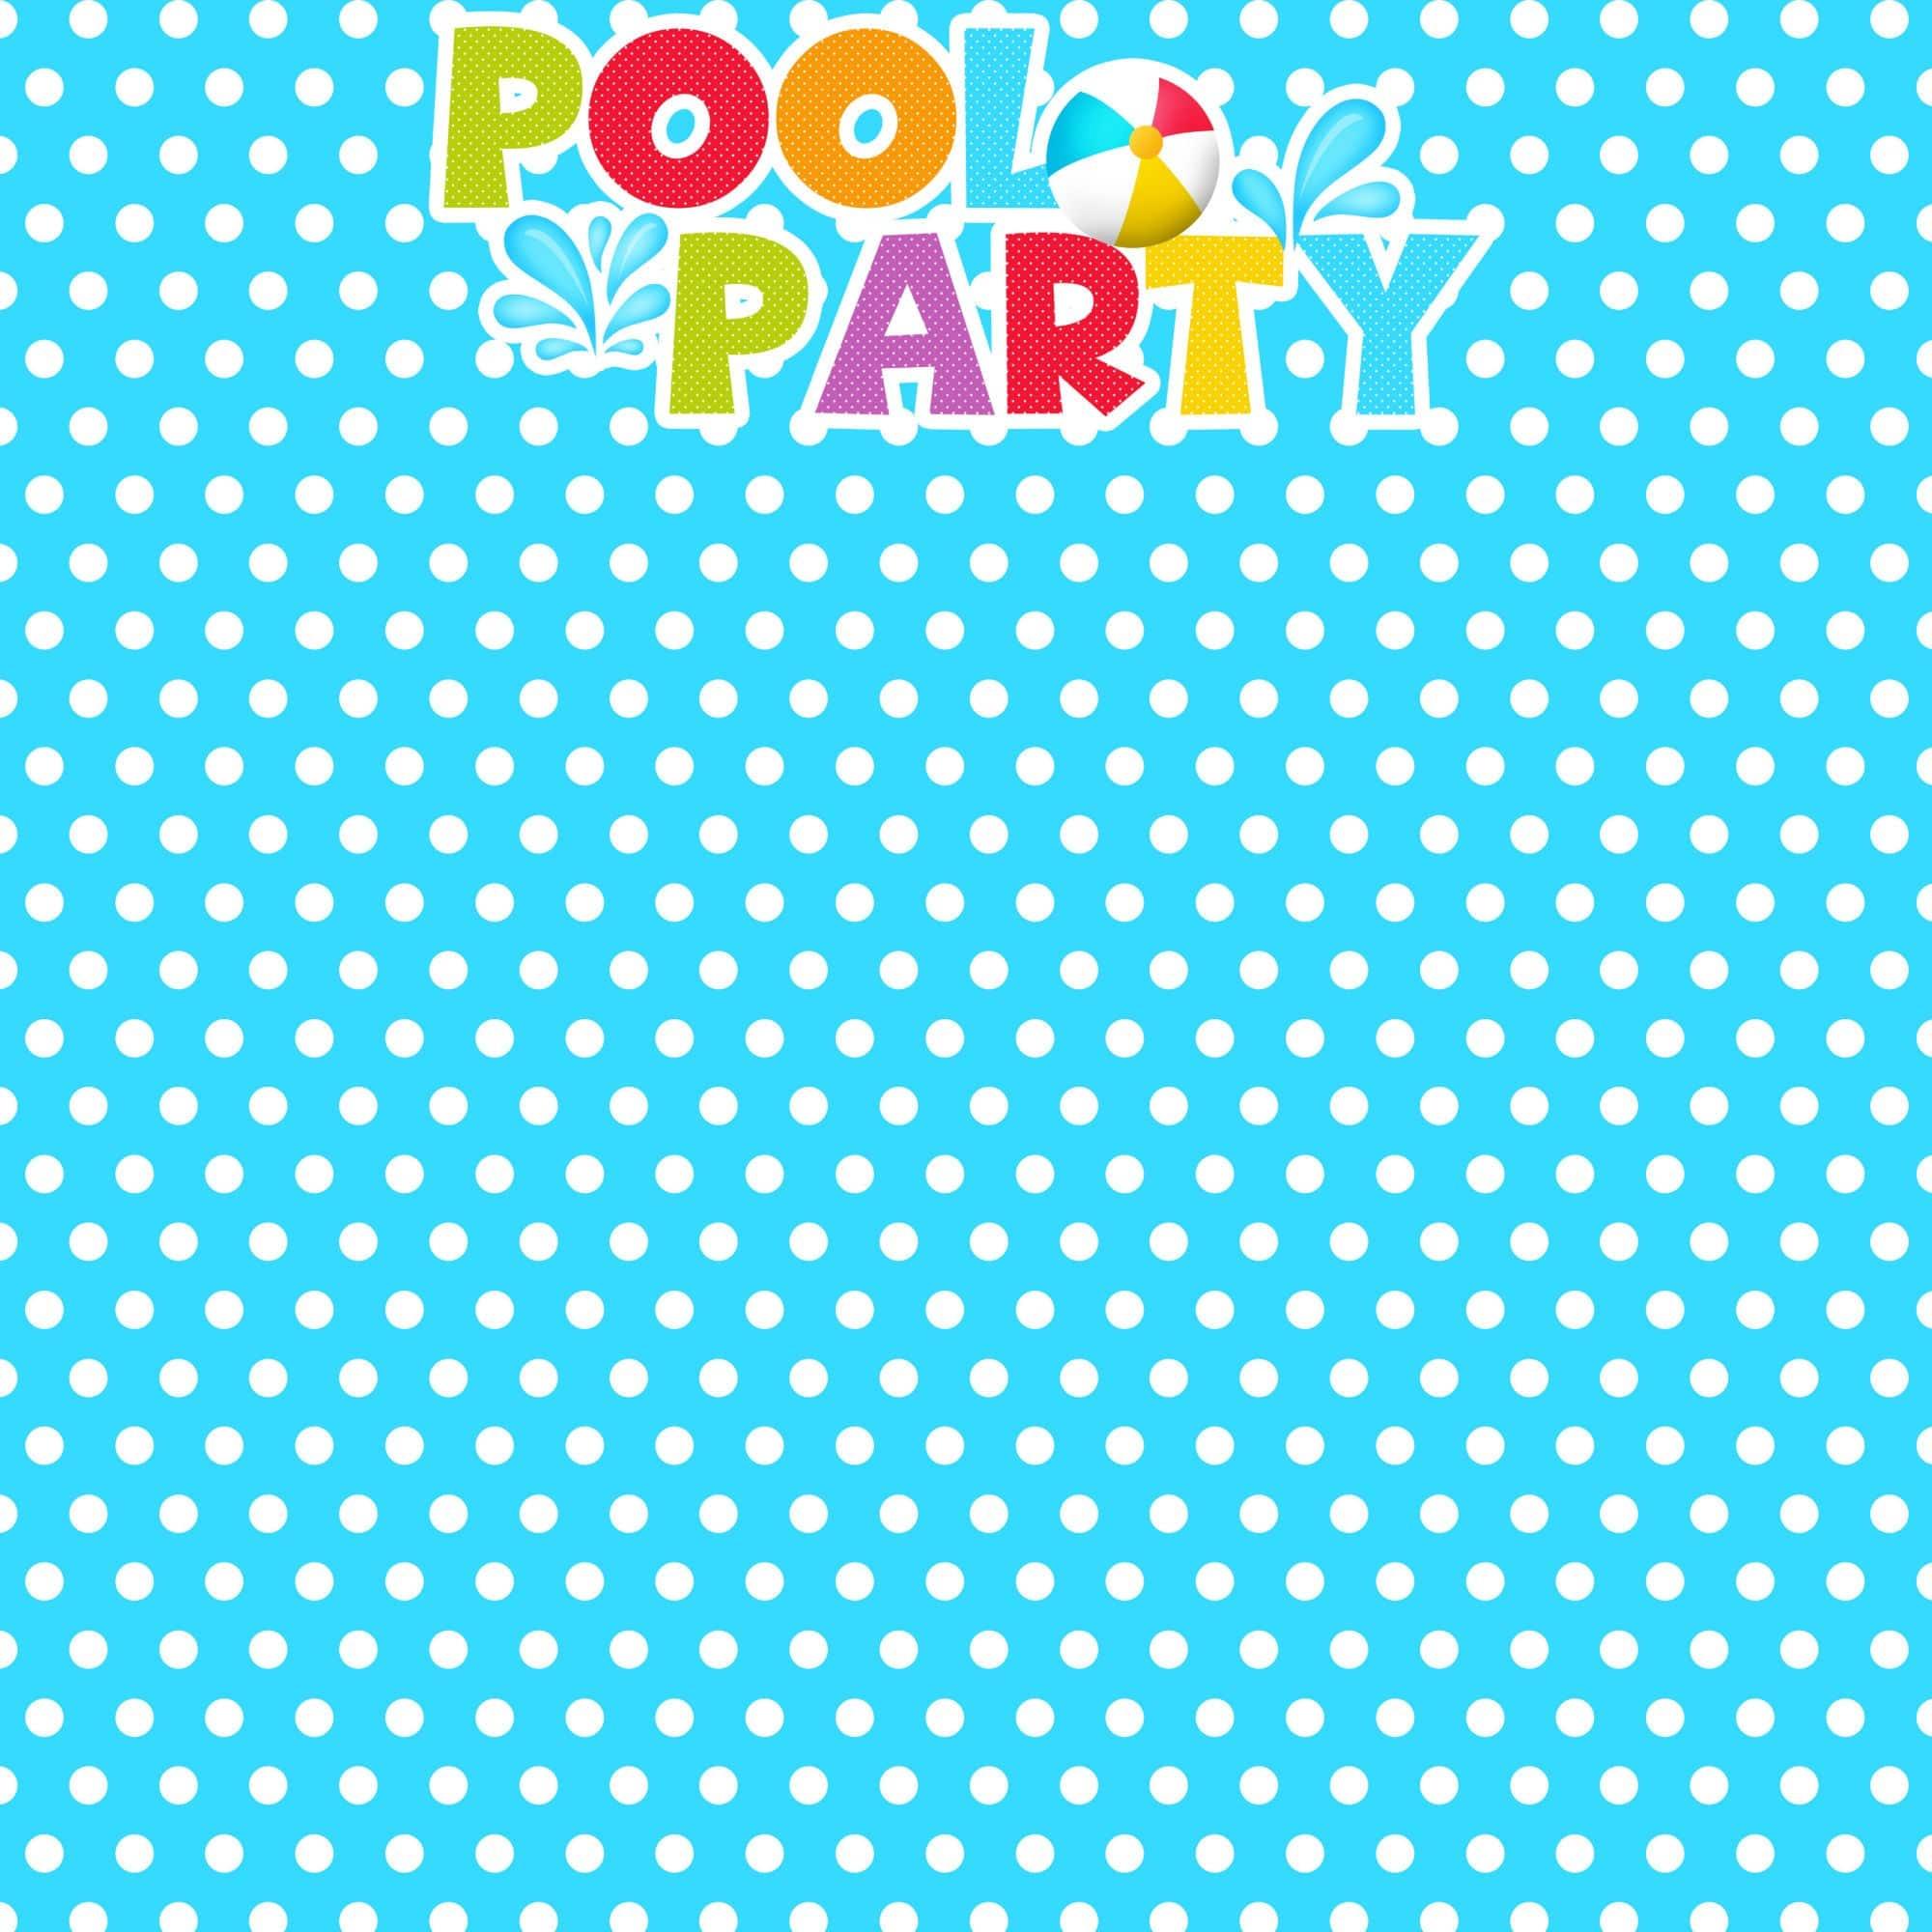 Pool Party Collection Pool Party 12 x 12 Double-Sided Scrapbook Paper by SSC Designs - Scrapbook Supply Companies